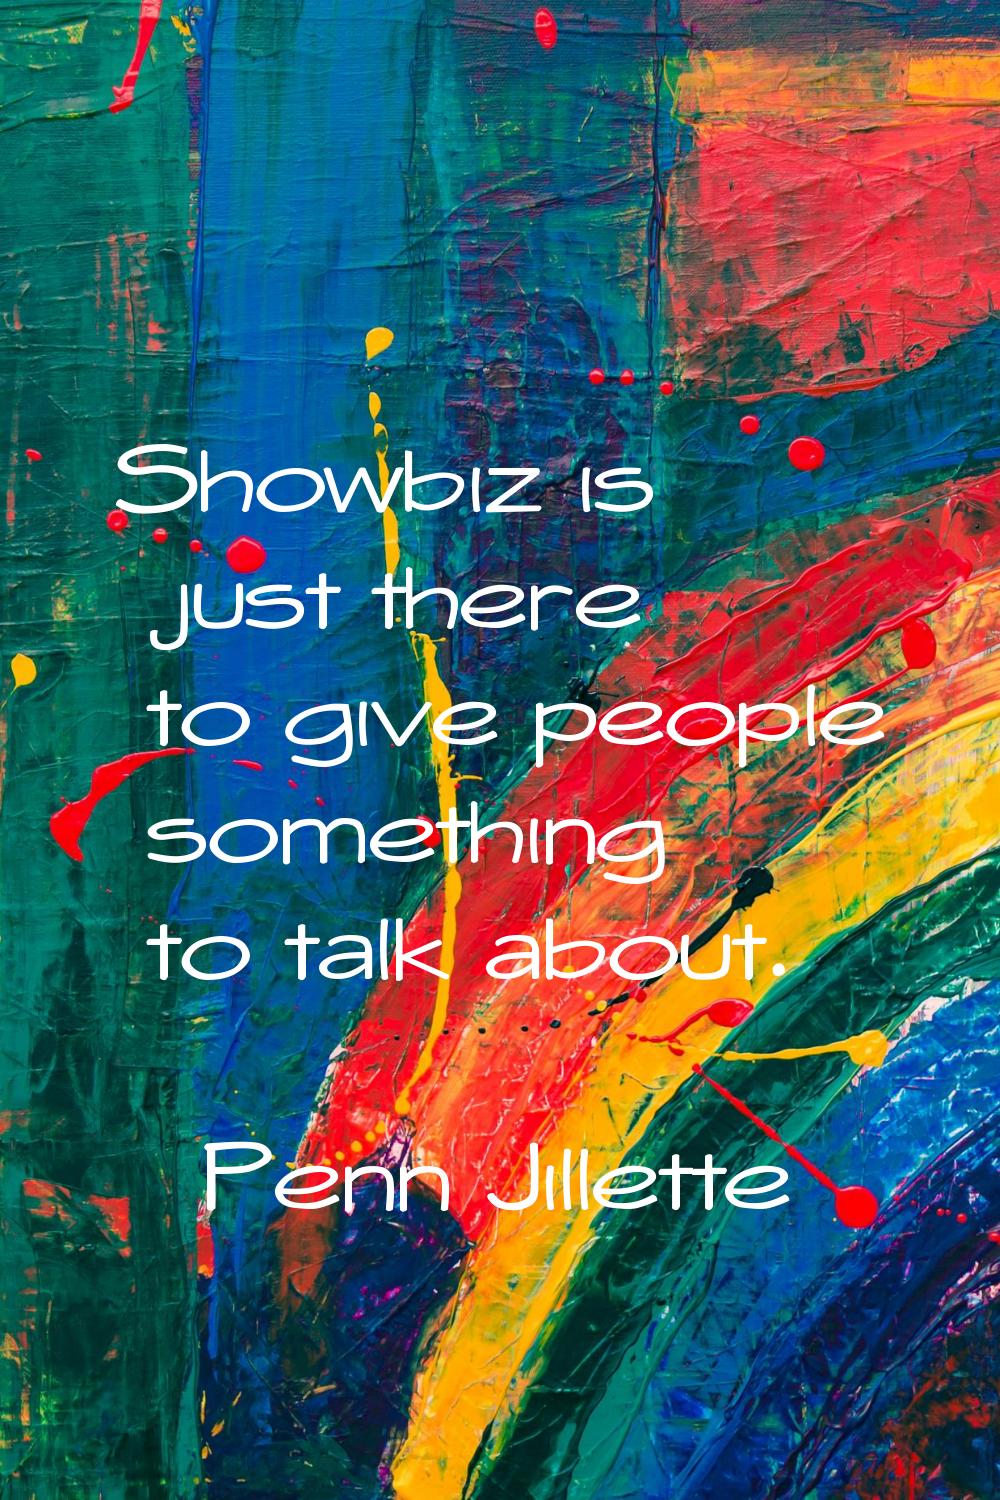 Showbiz is just there to give people something to talk about.